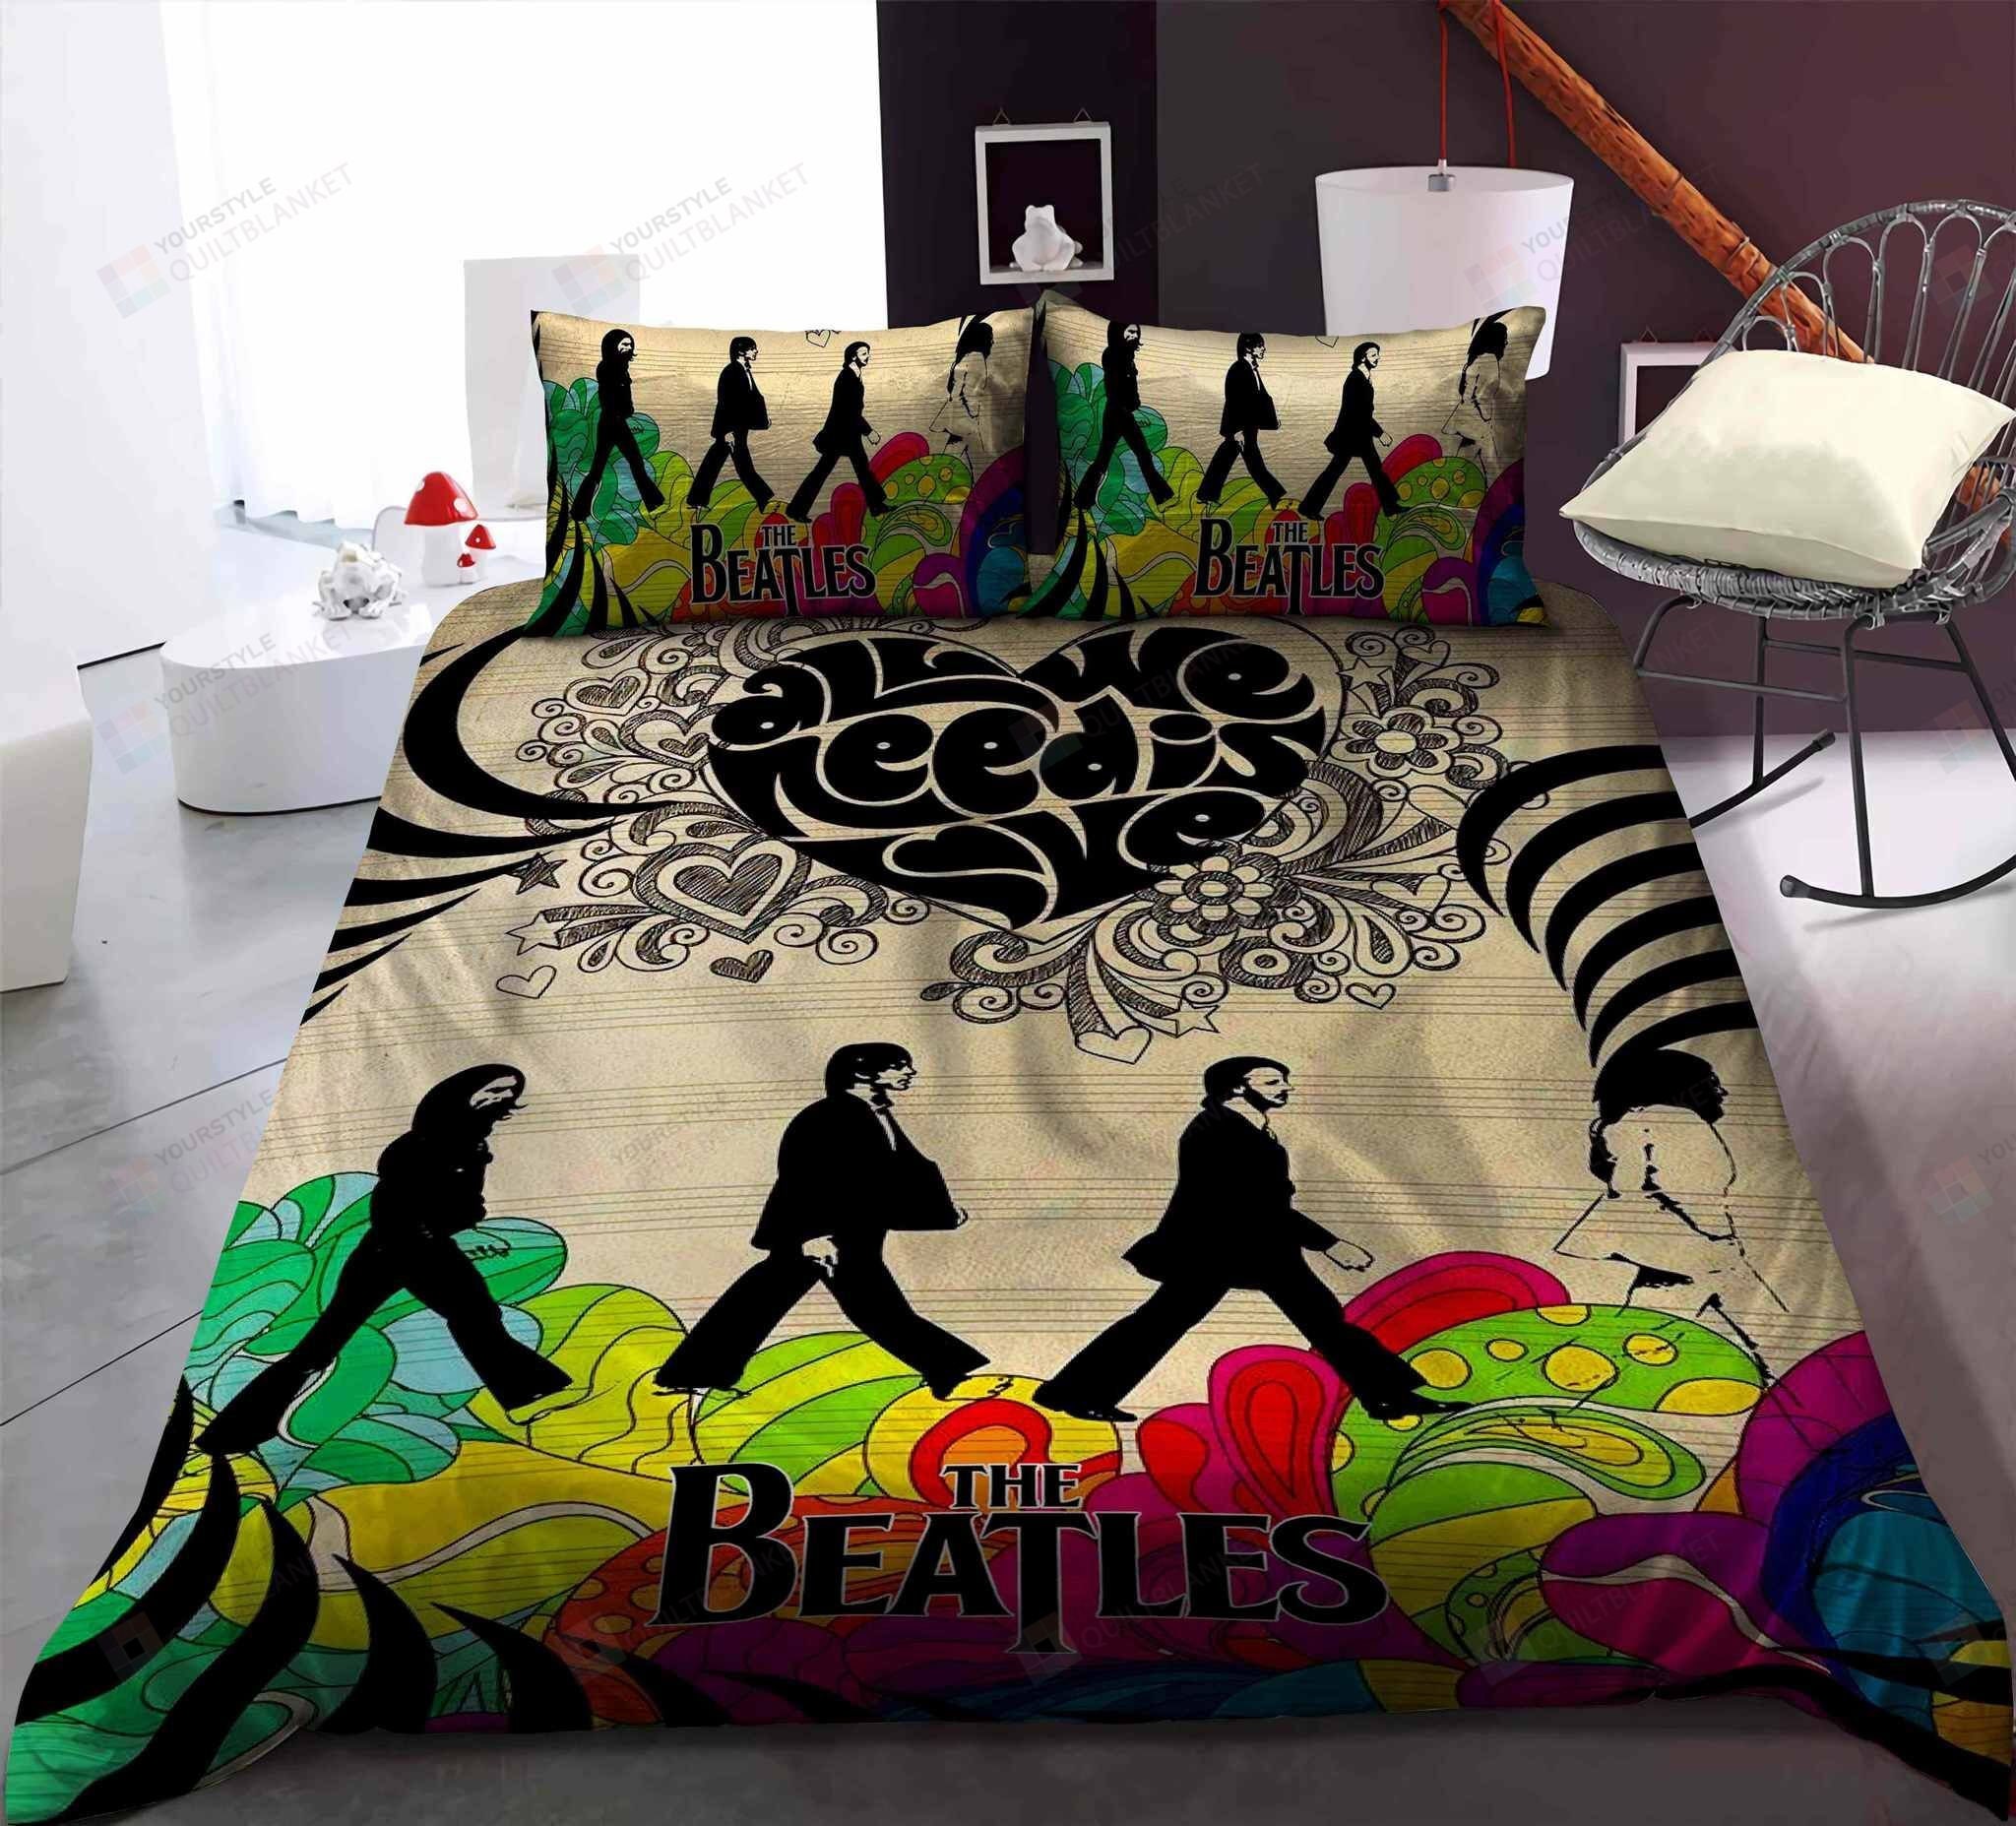 The Beatles Bedding Set All We Need Is Love Colorful Design | Etsy